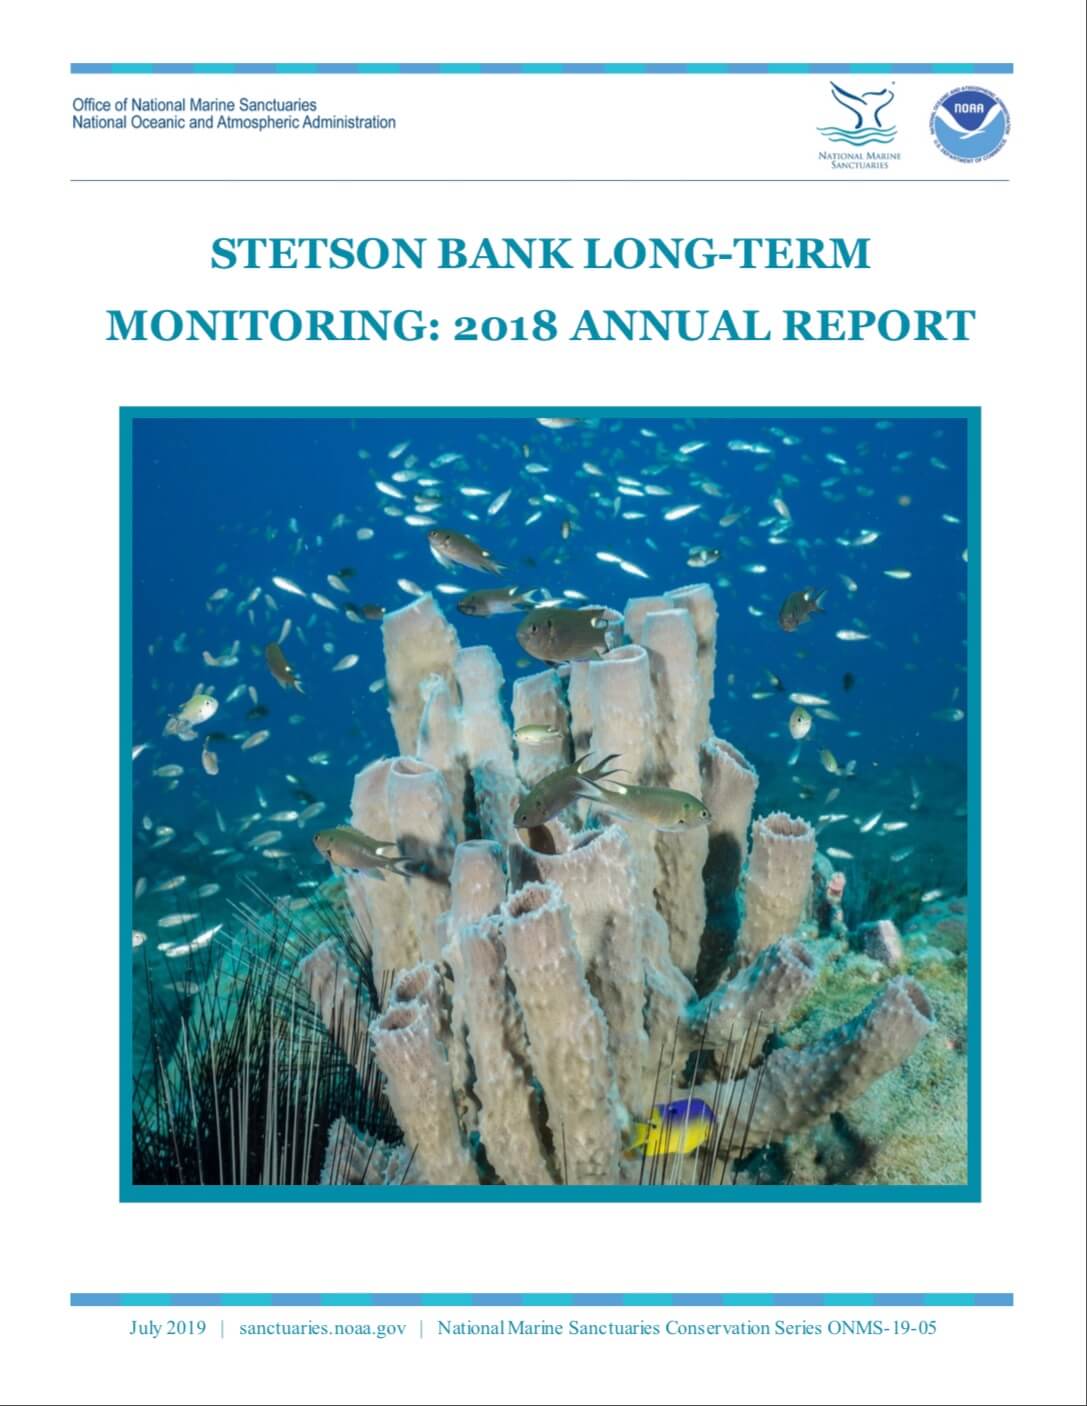 multiple fish near a reef - stetson bank long-term monitoring: 2018 annual report cover